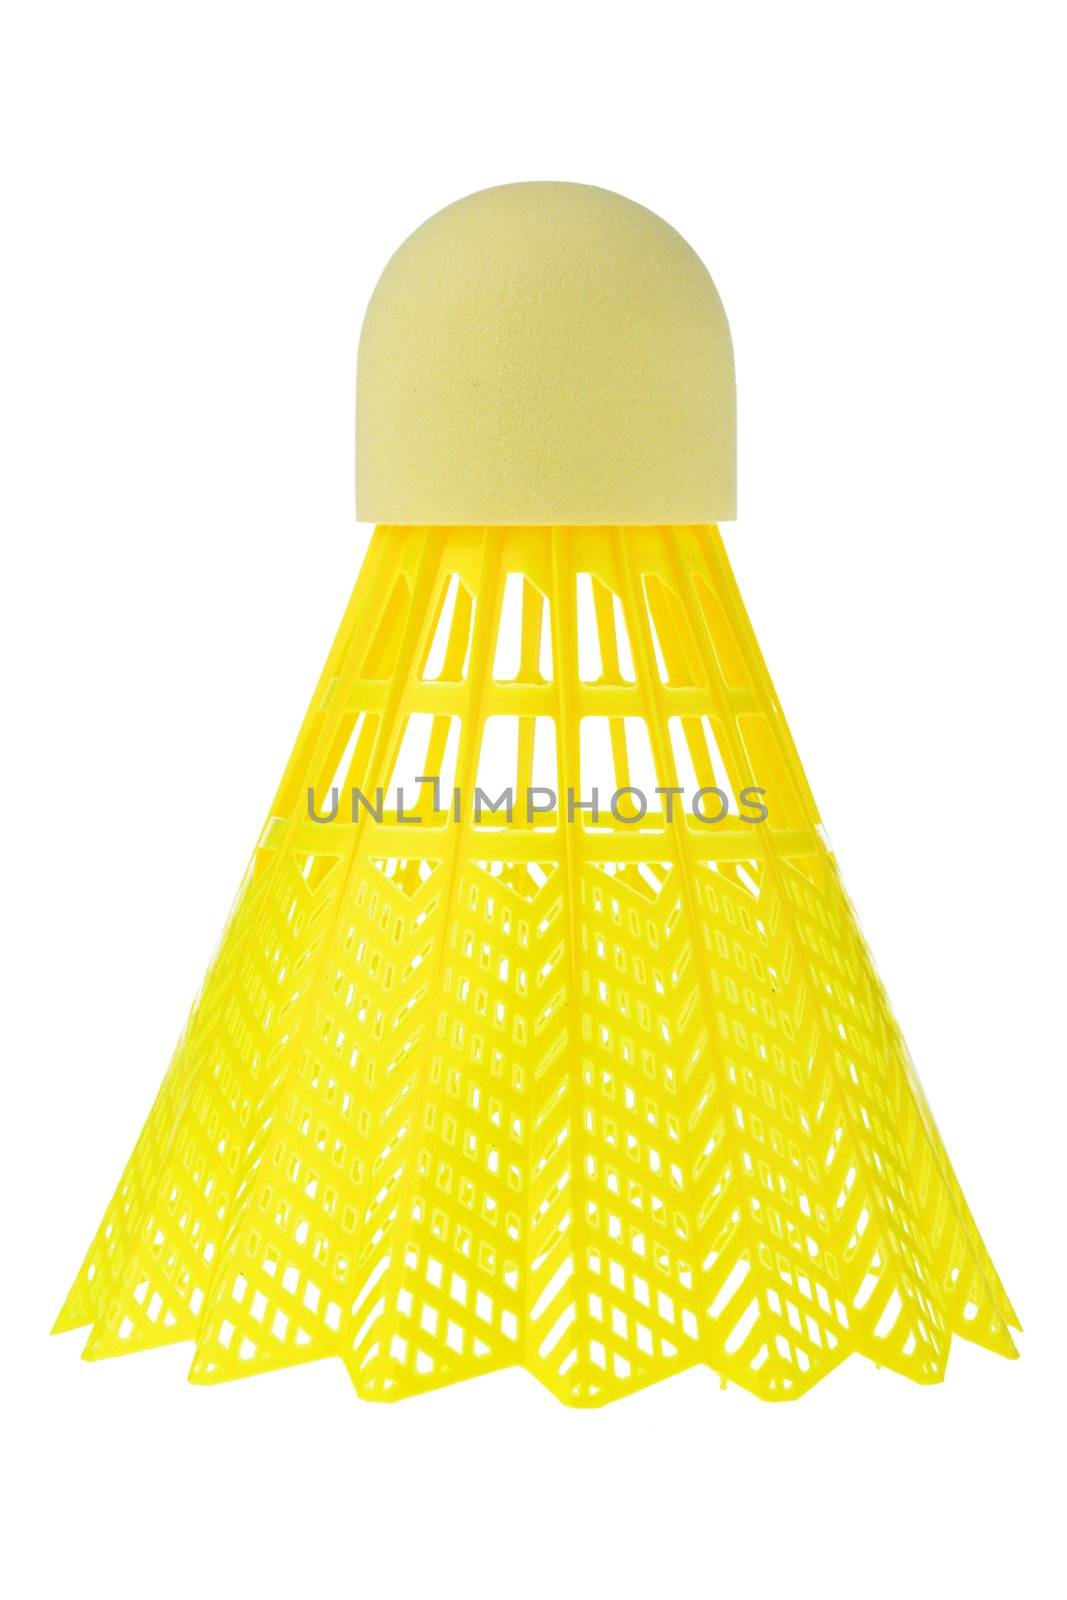 Bright yellow badminton shuttlecock isolated on white background.